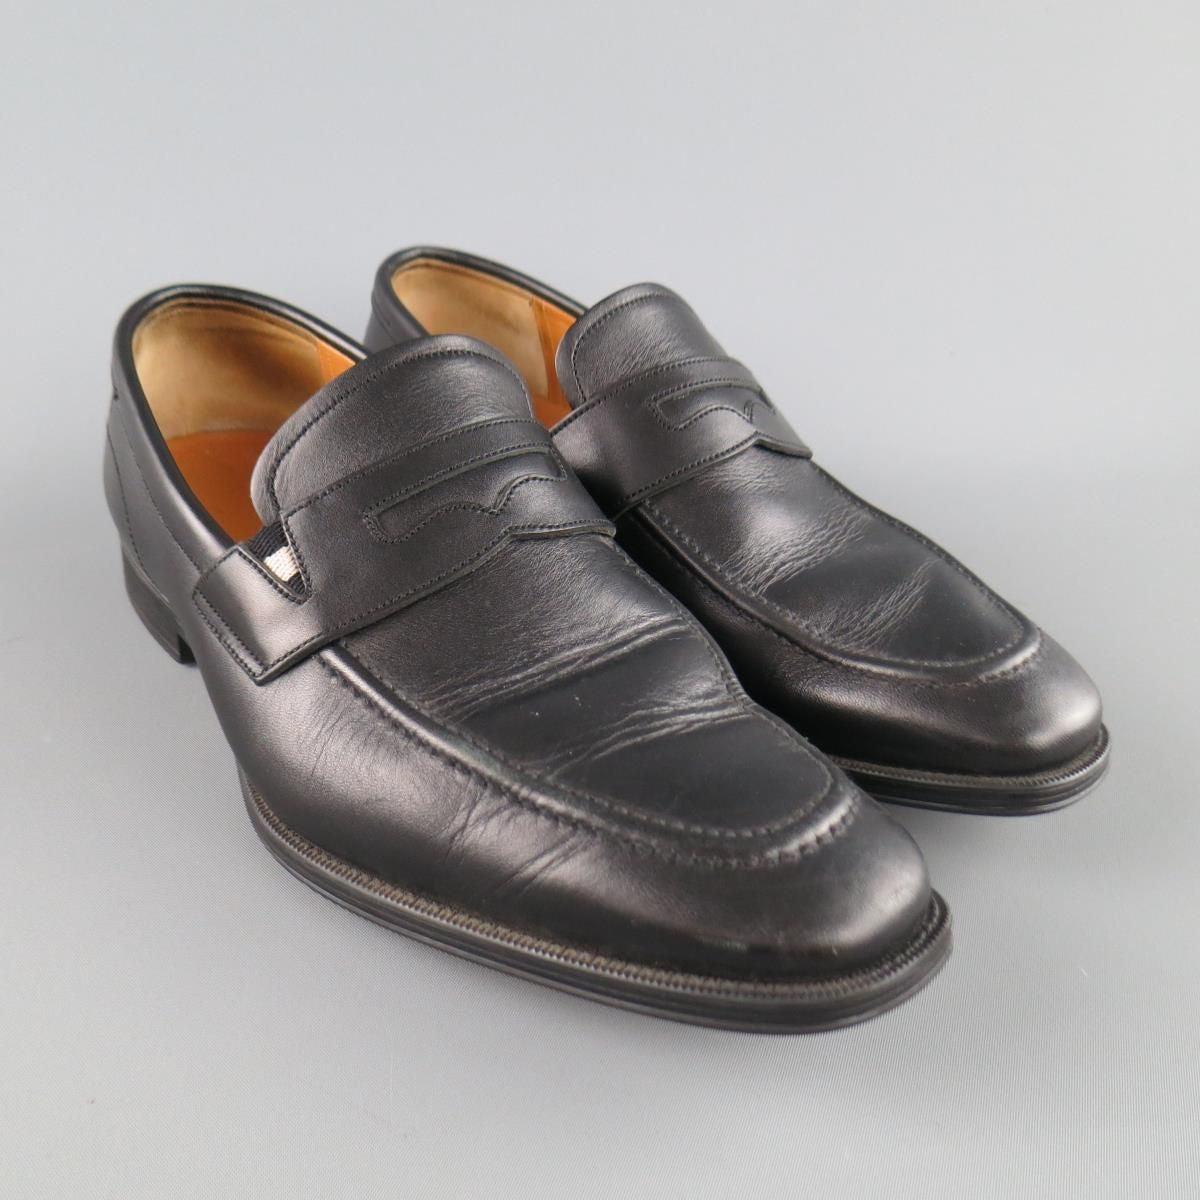 BALLY penny loafers come in black smooth leather and feature an apron tow and penny strap with striped elastic detail. with Box. Made in Switzerland. Excellent Pre-Owned Condition. 

Marked:   7.5Outsole: 11.5 x 4 inches 
  
  
 
Reference: